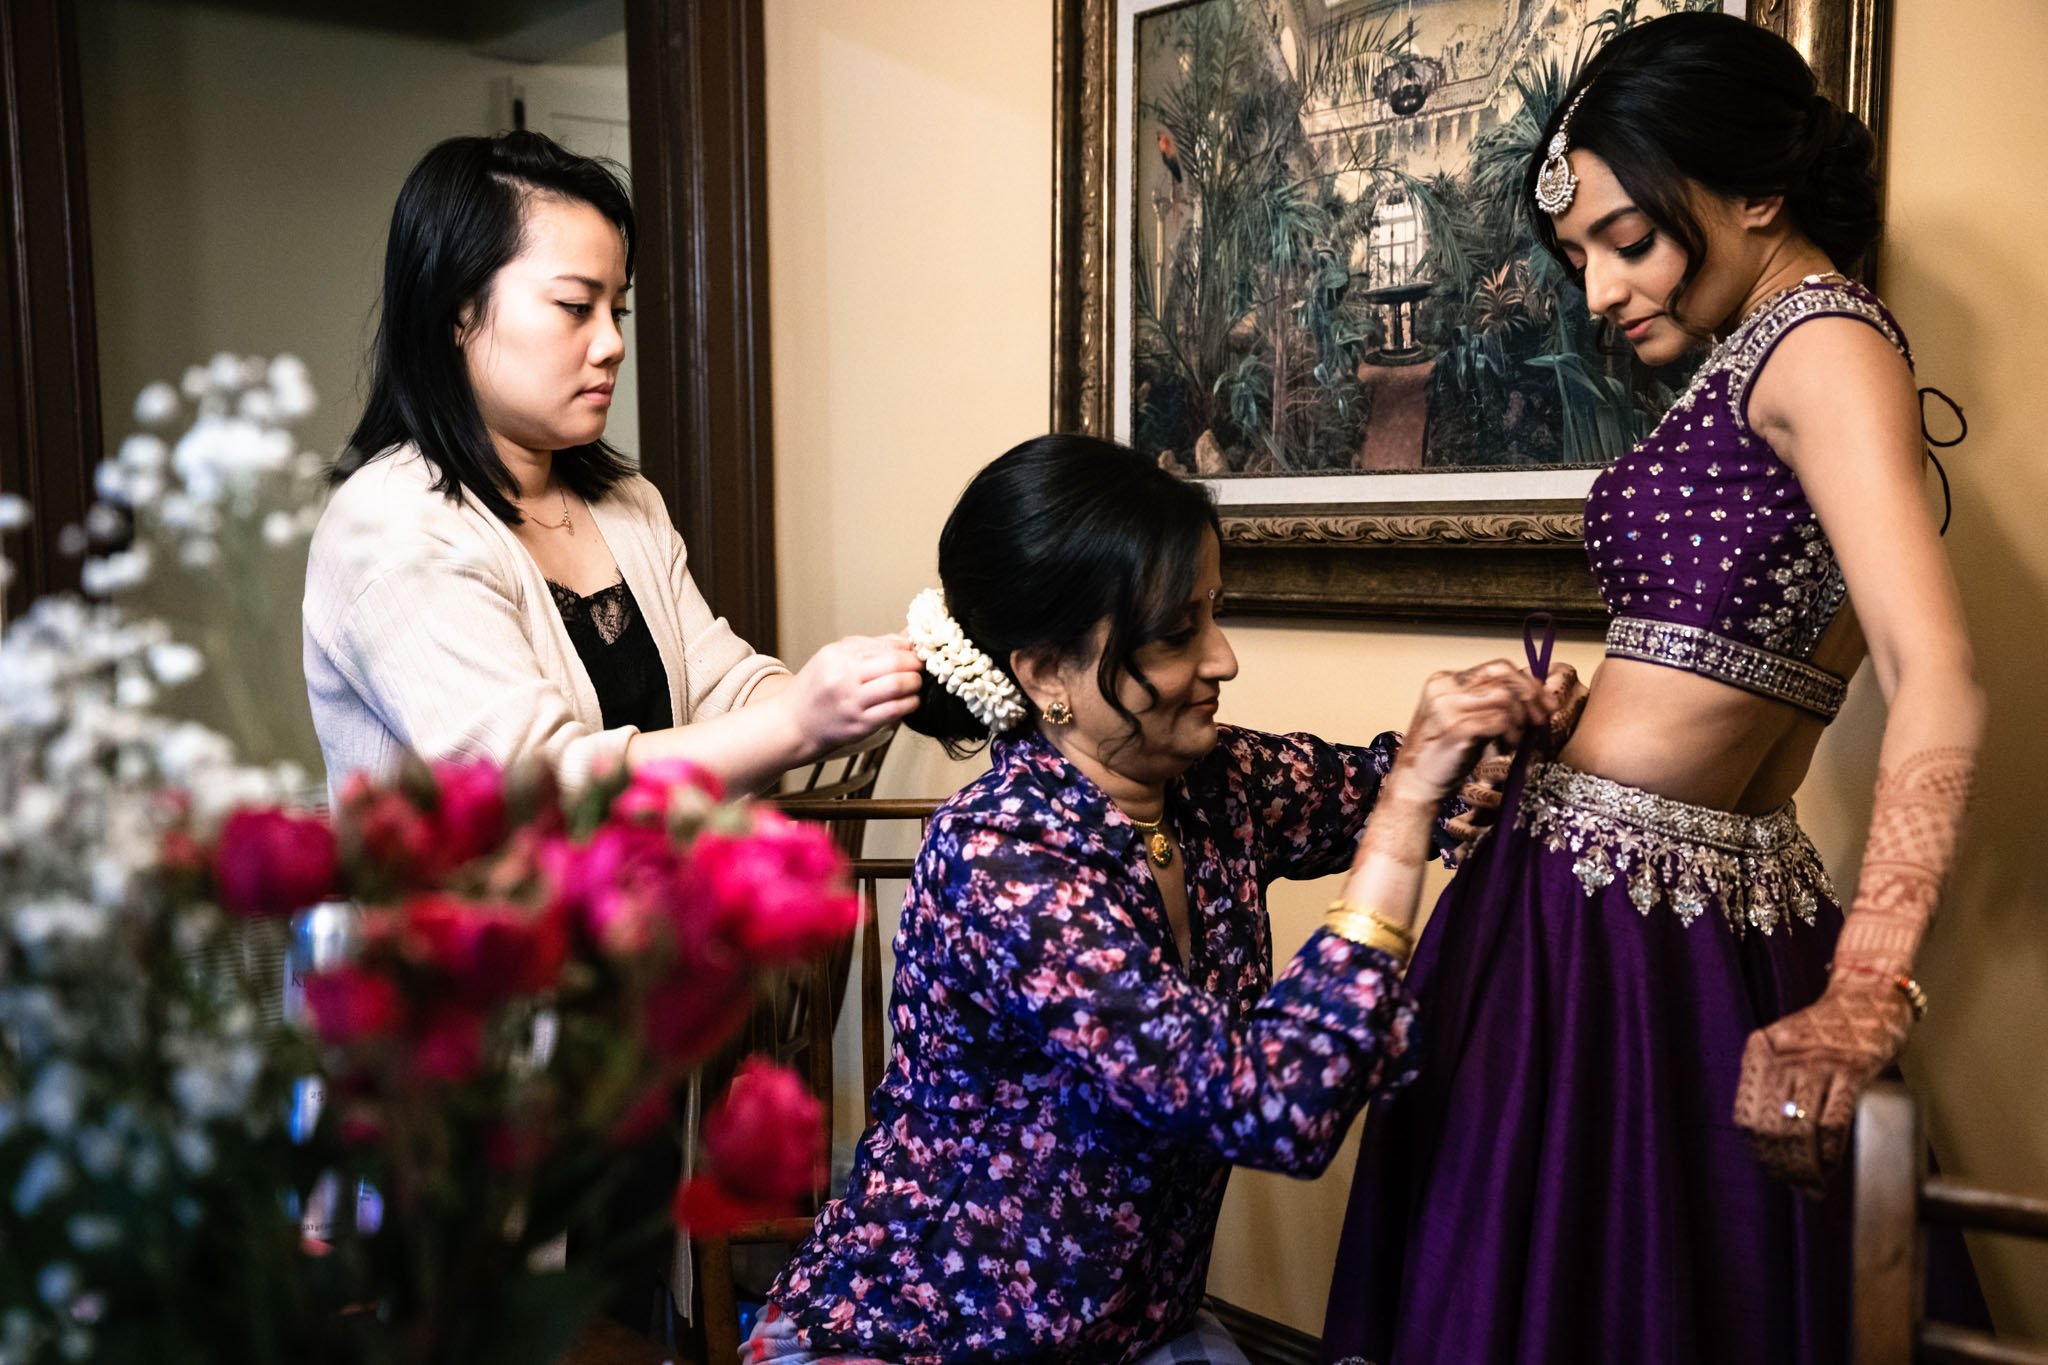 A woman at a Biltmore Estate wedding is helping another woman put on a purple sari.